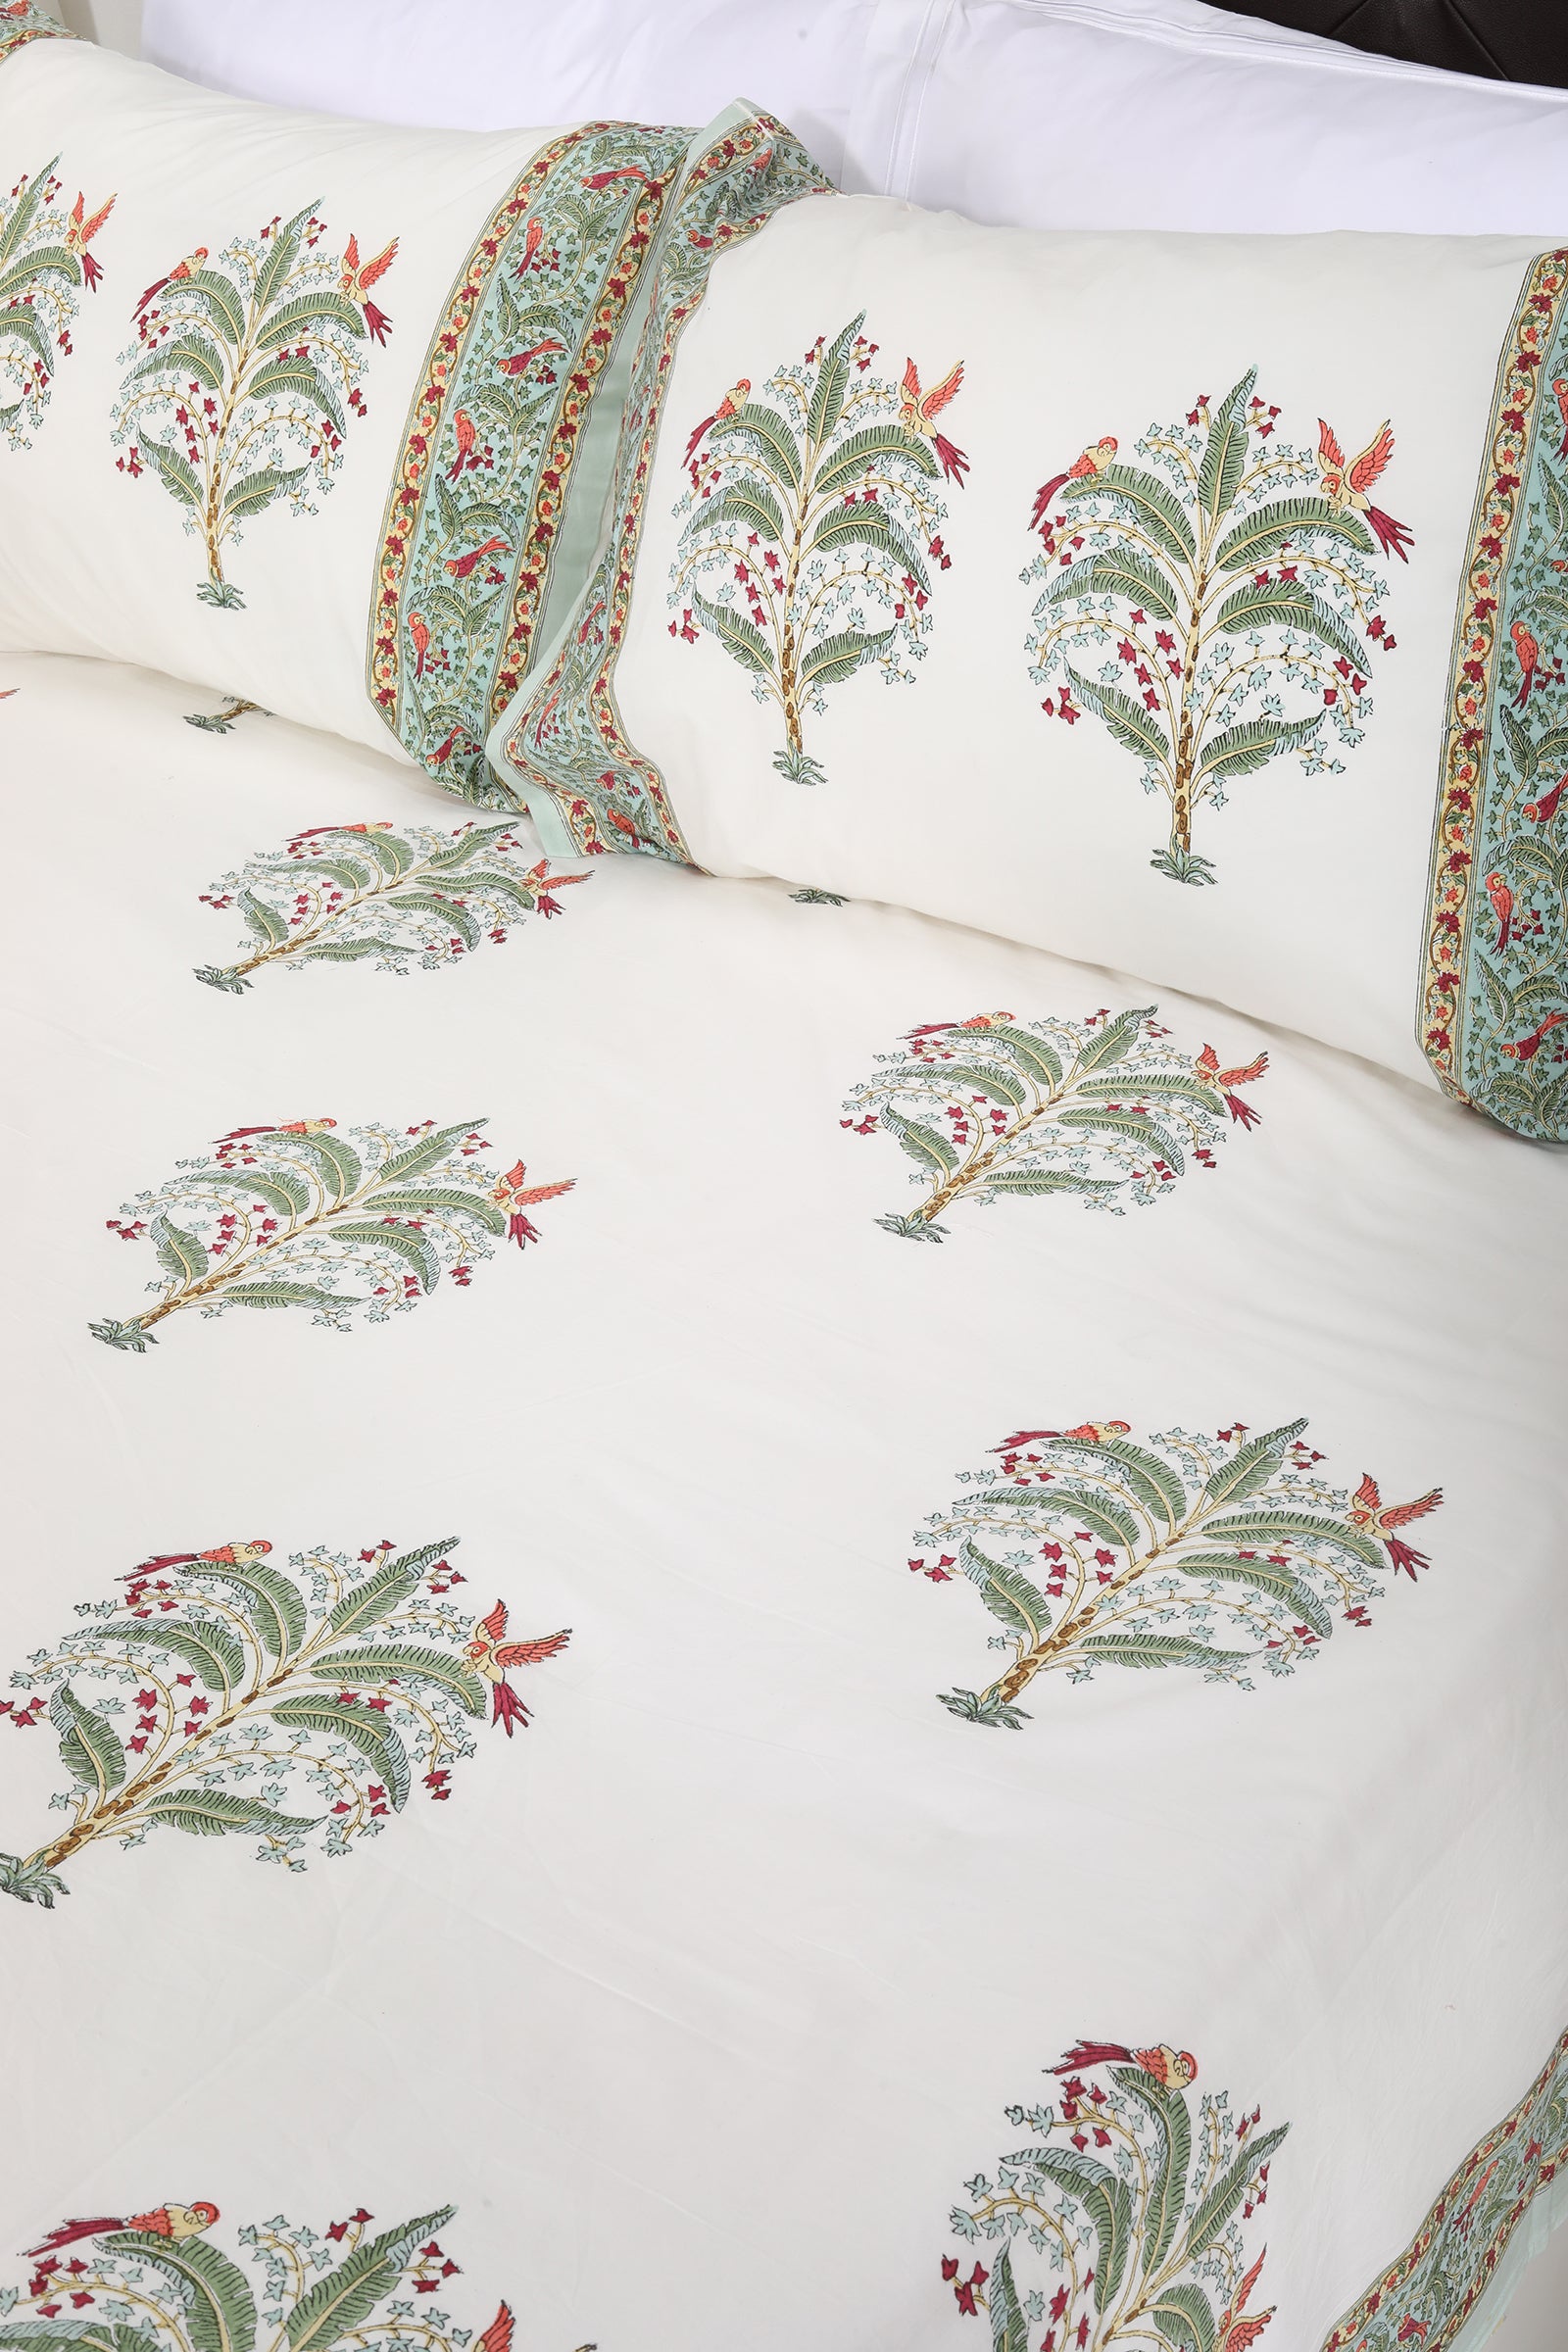 Parrot Bootah Cotton Percale Hand Block Printed Bedsheet - shahenazindia